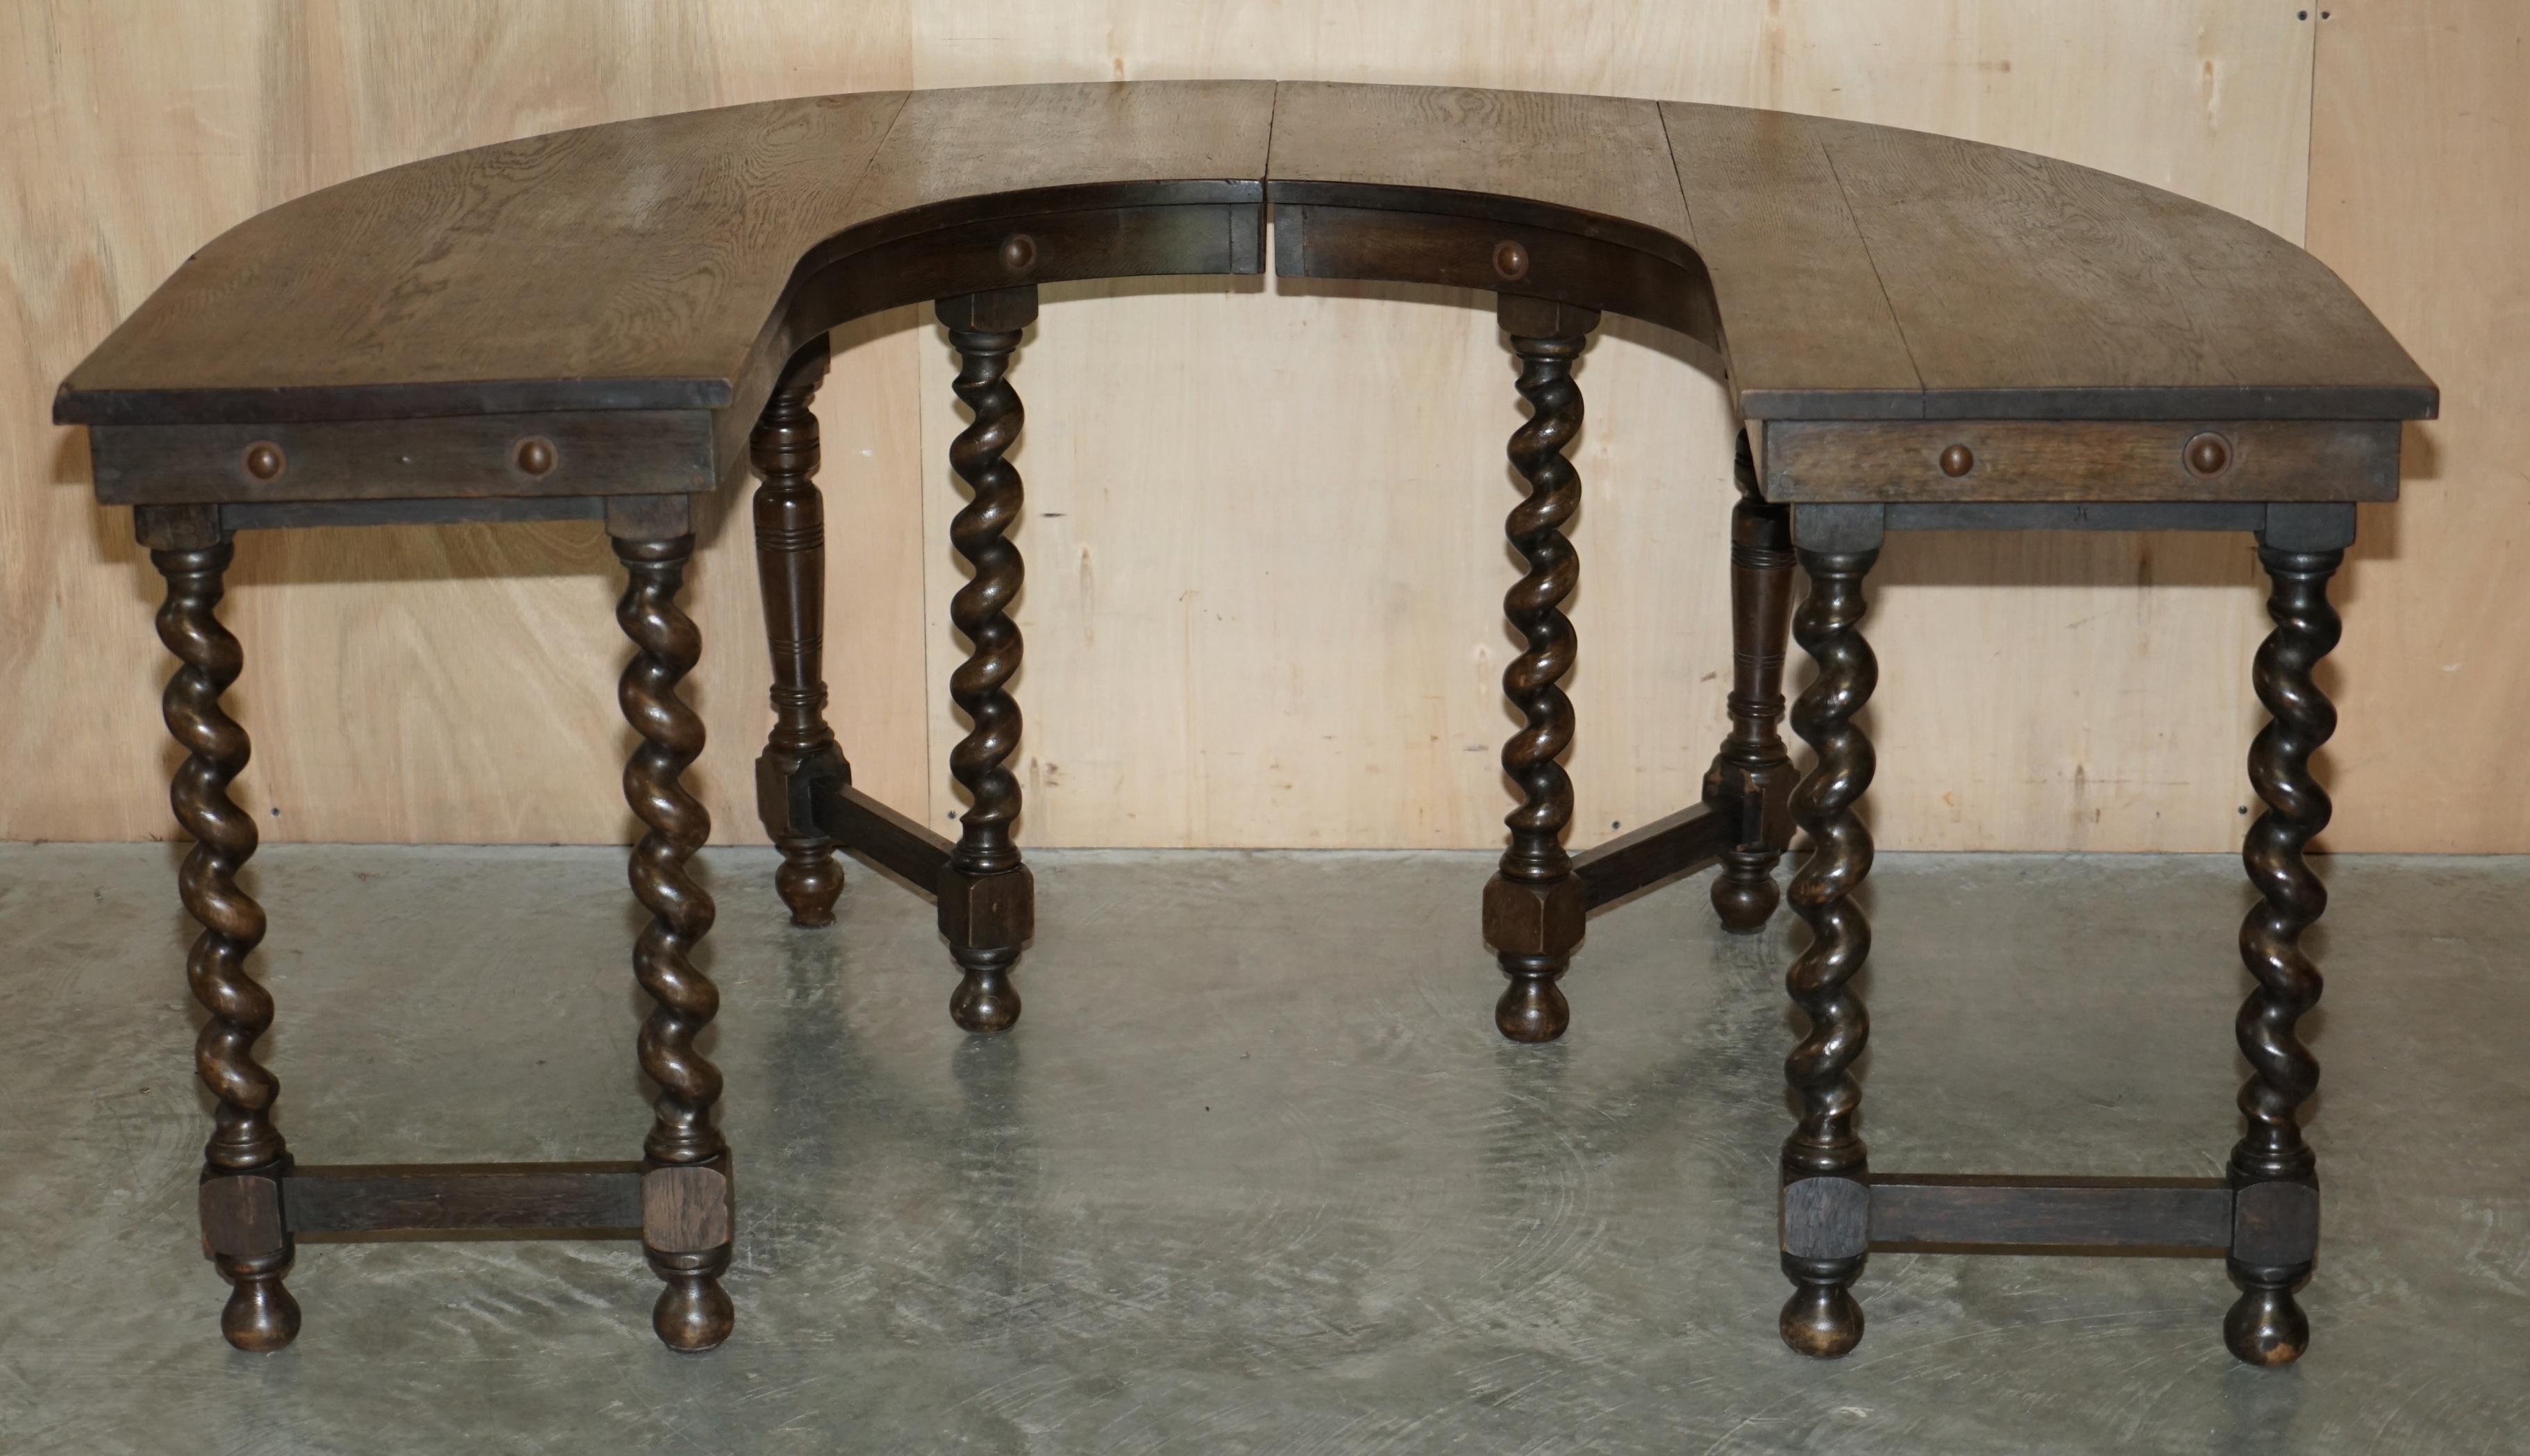 RARE & COLLECTABLE ANTIQUE JACOBEAN REVIVAL BARLEY TWiST LEG ENGLISH HUNT TABLE For Sale 6